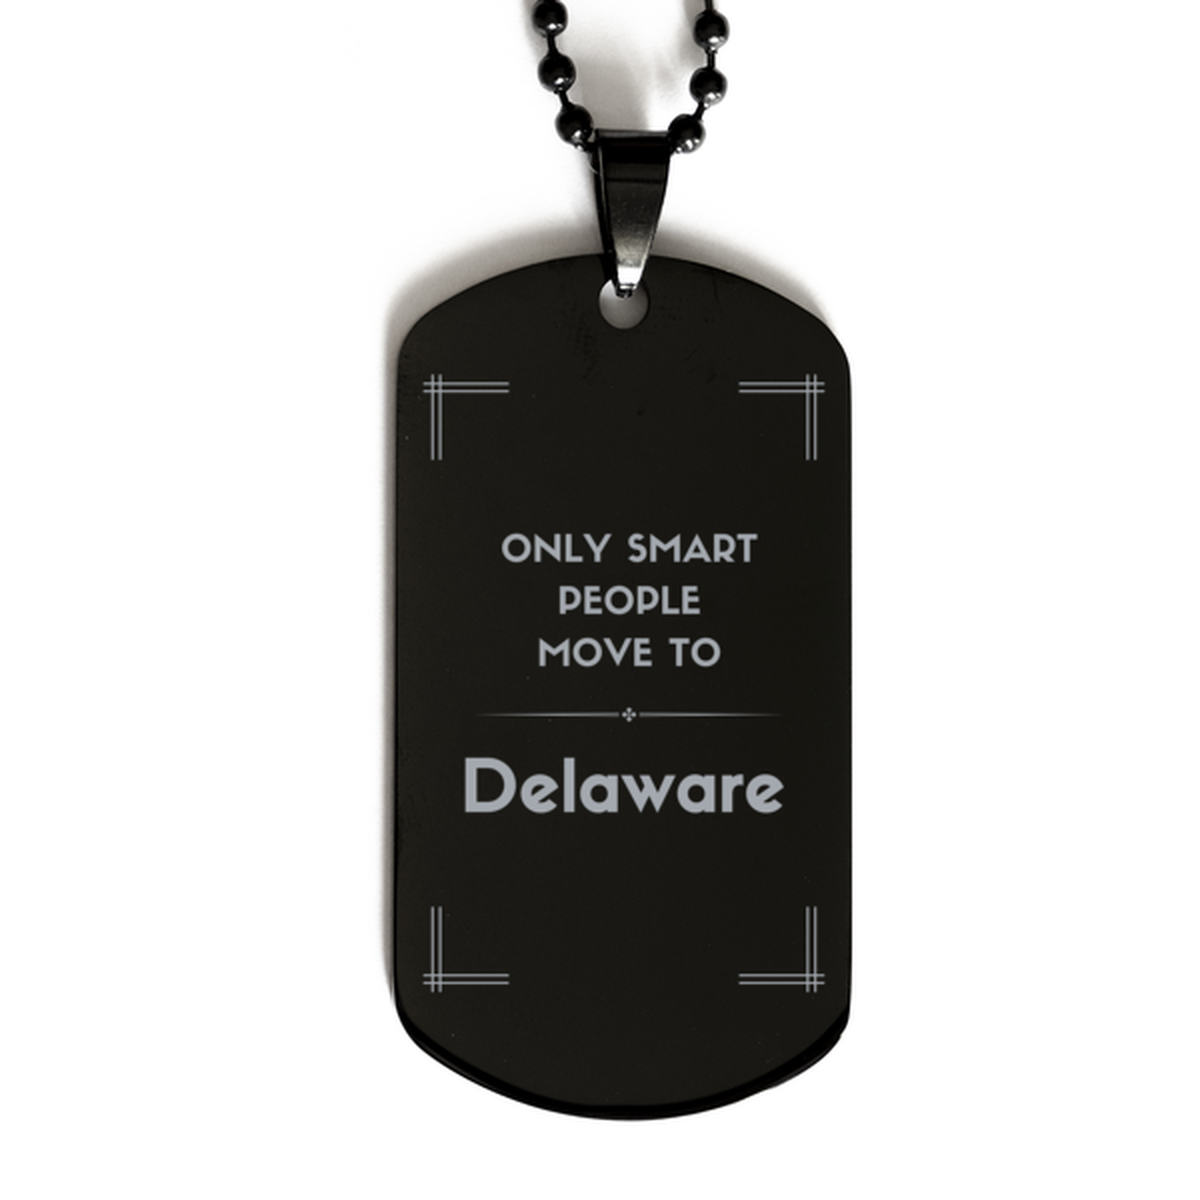 Only smart people move to Delaware Black Dog Tag, Gag Gifts For Delaware, Move to Delaware Gifts for Friends Coworker Funny Saying Quote